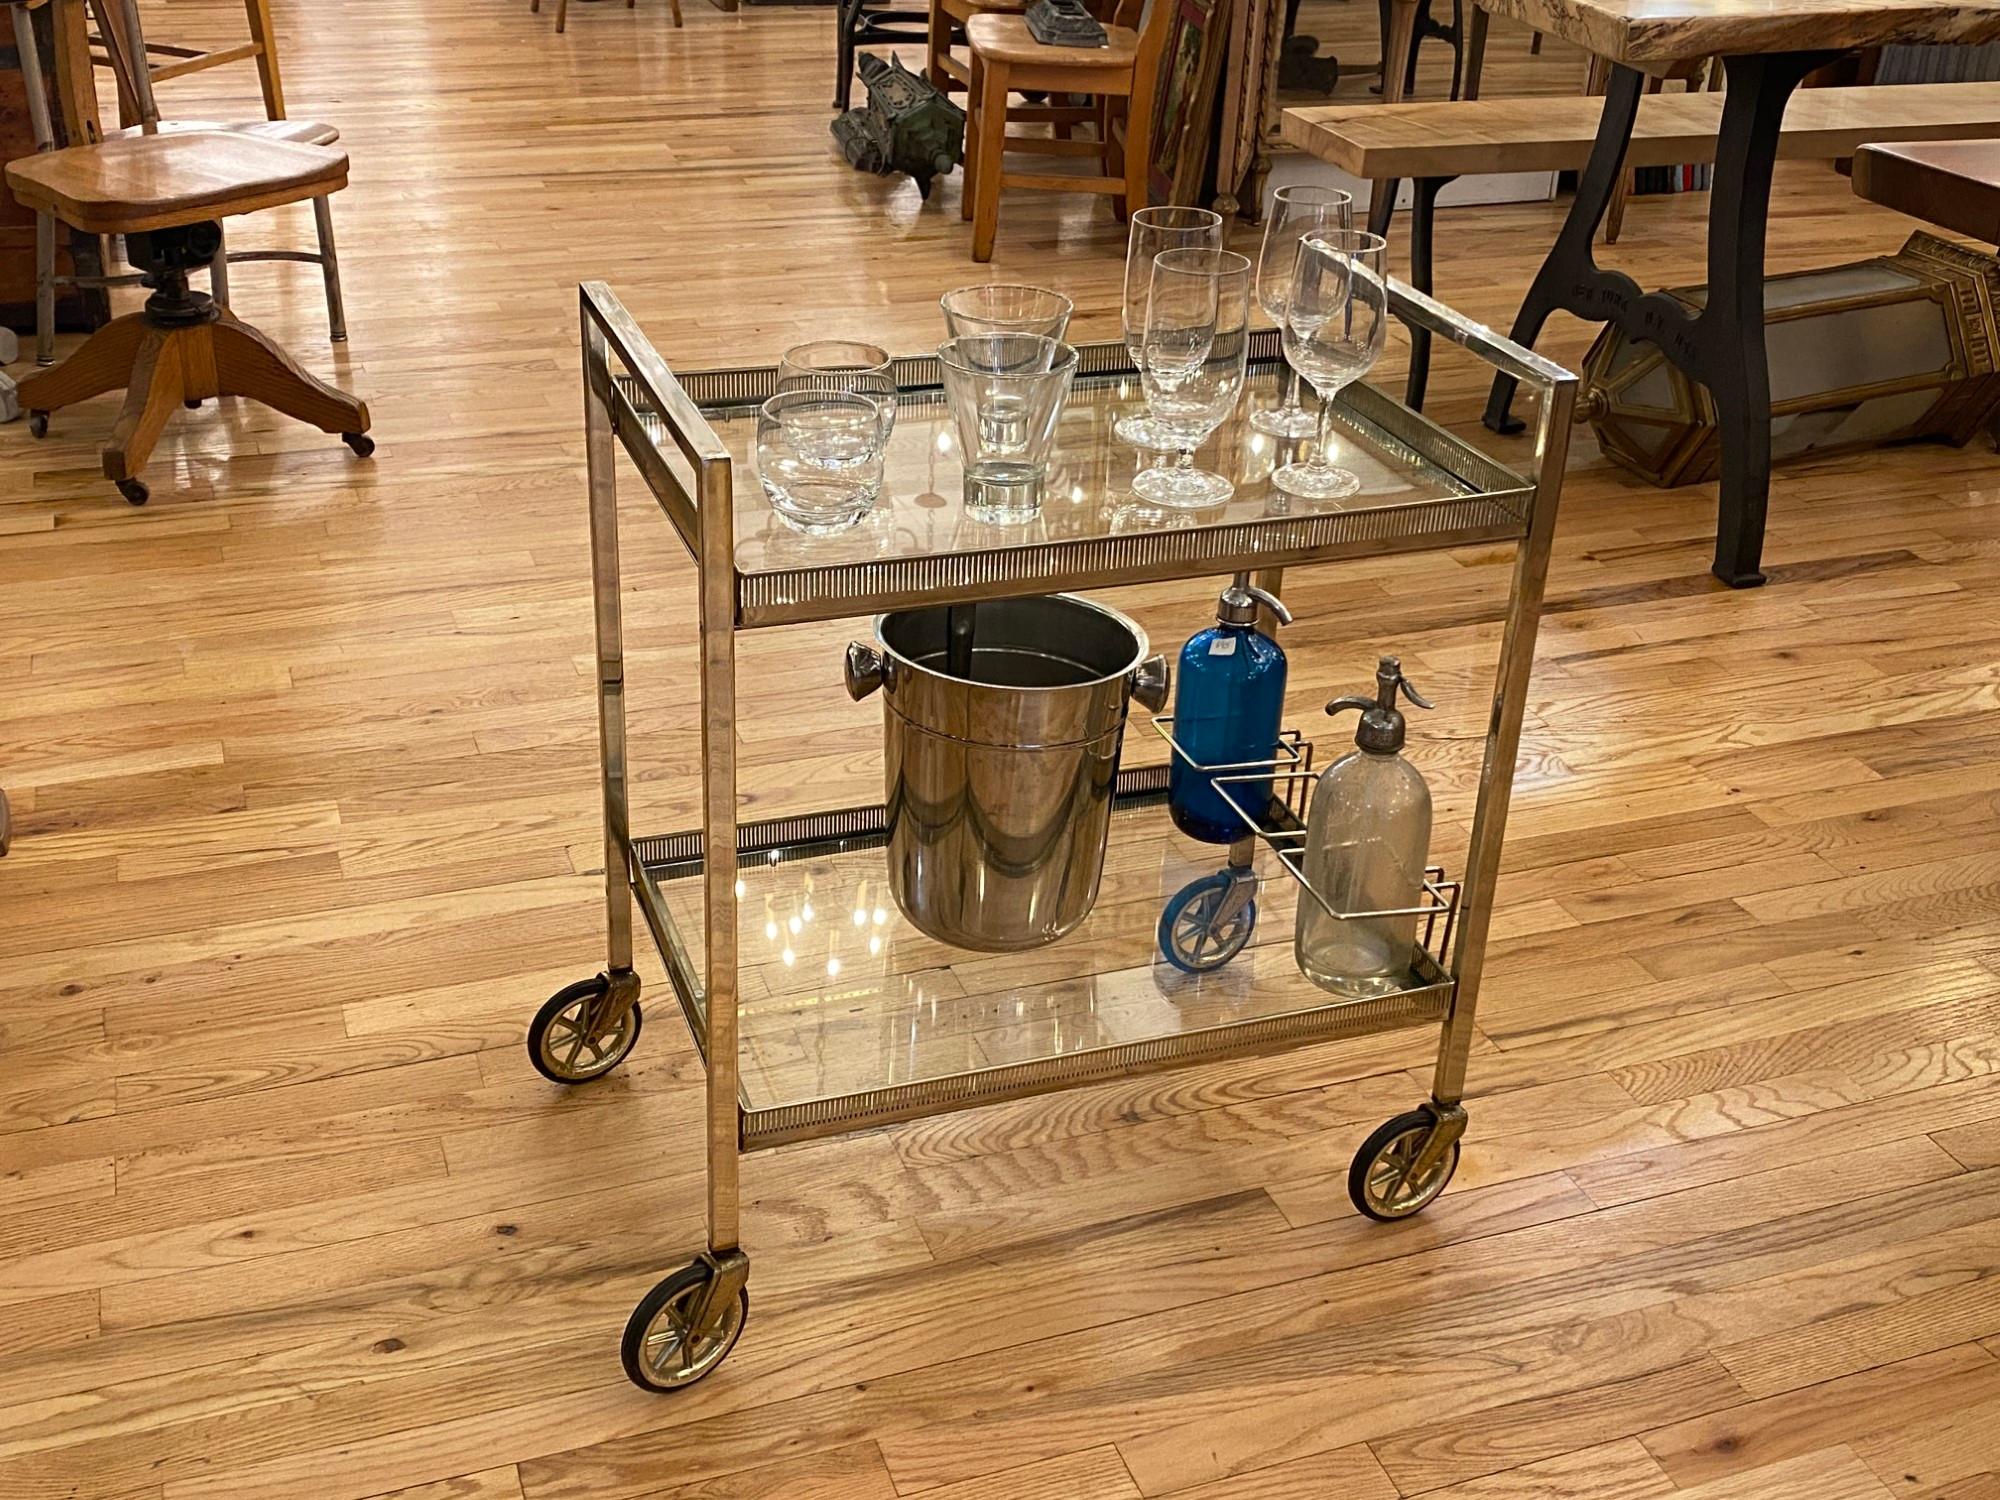 1990s Mid-Century Modern Bar Cart from Belgium, Nickel-Plated with Glass Shelves 1